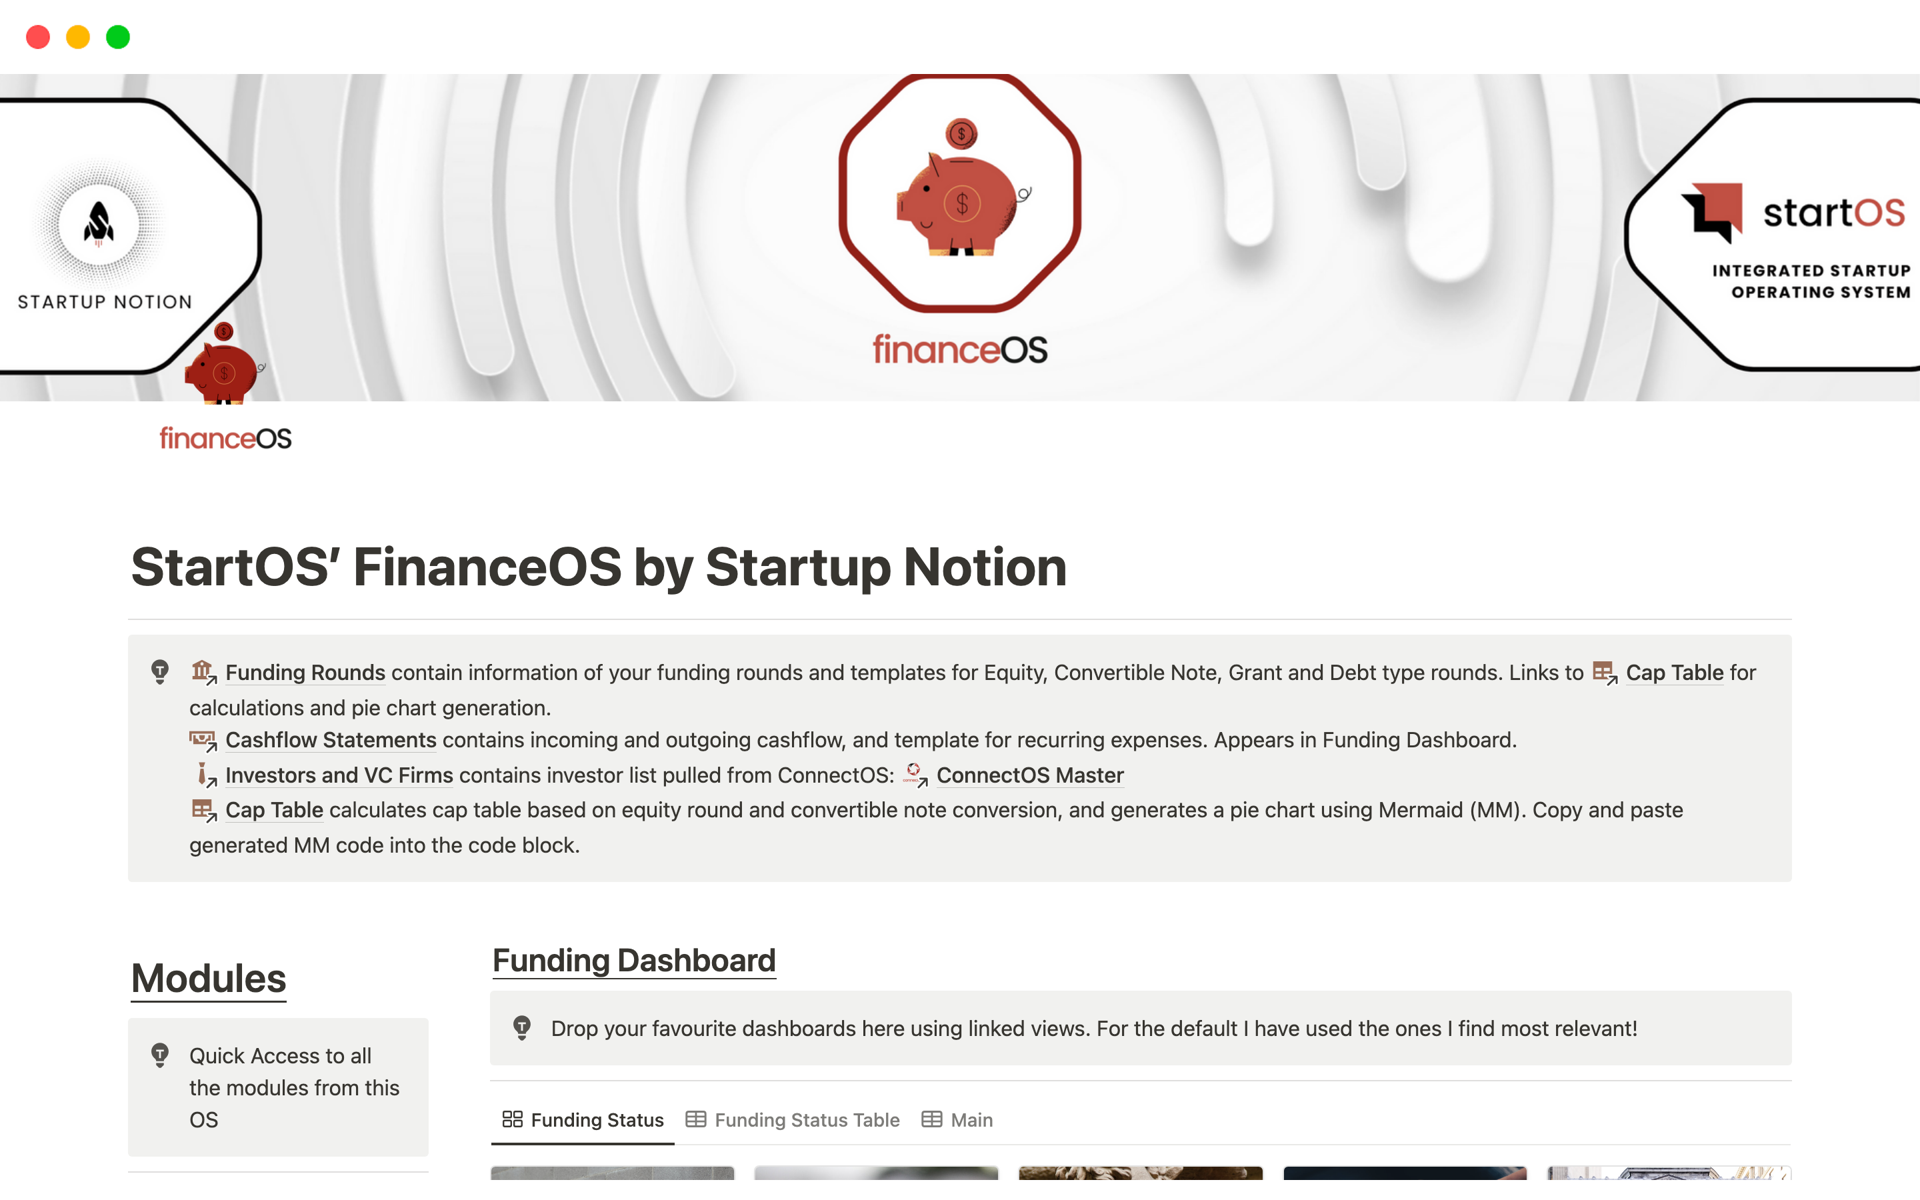 Startup cashflow, financial projections, fundraising, cap table management, DCF valuation and more, in one system.